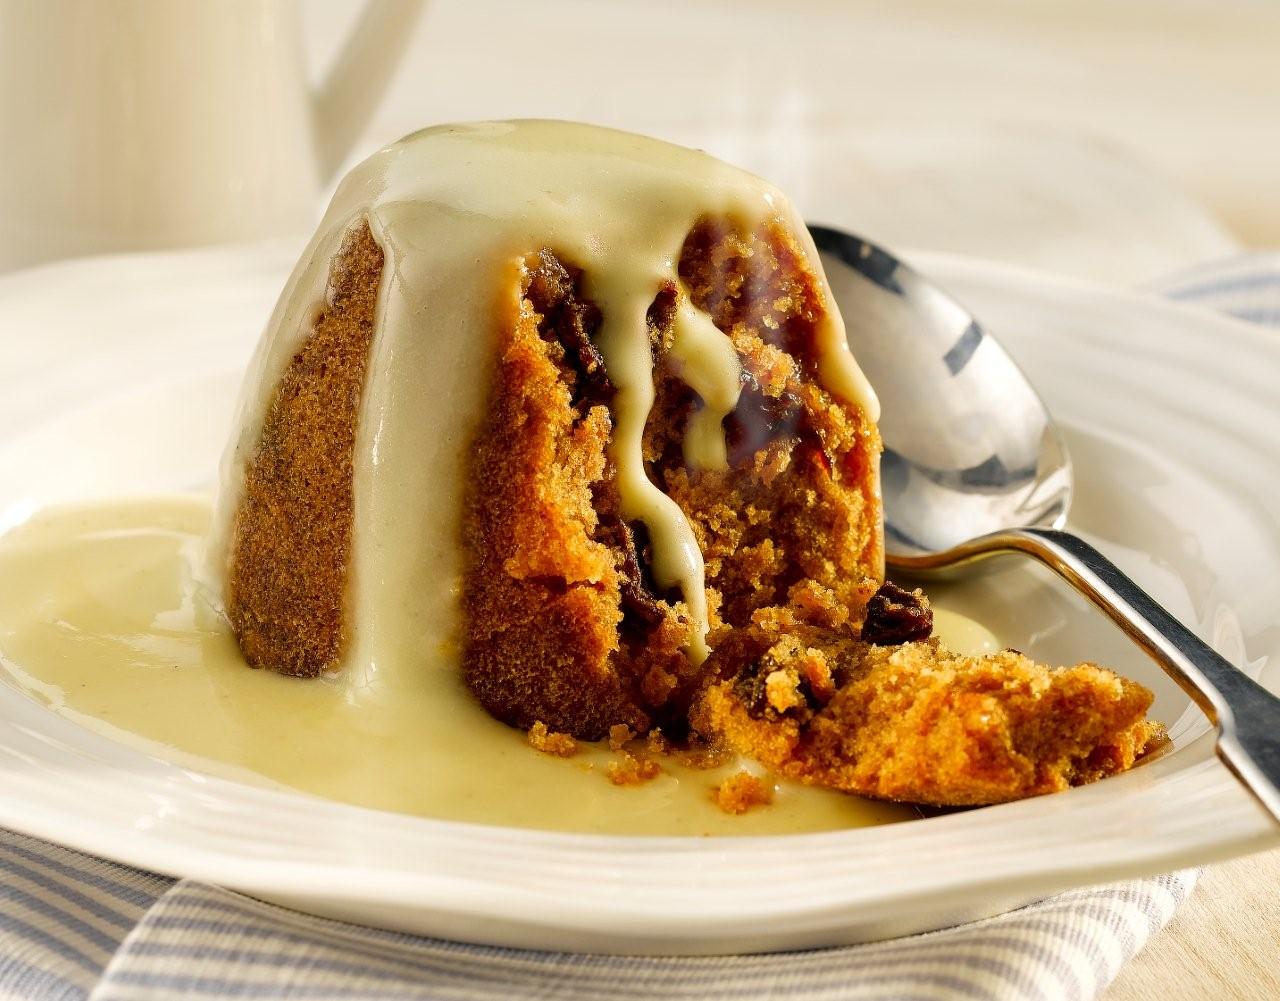 Spotted dick with hot custard